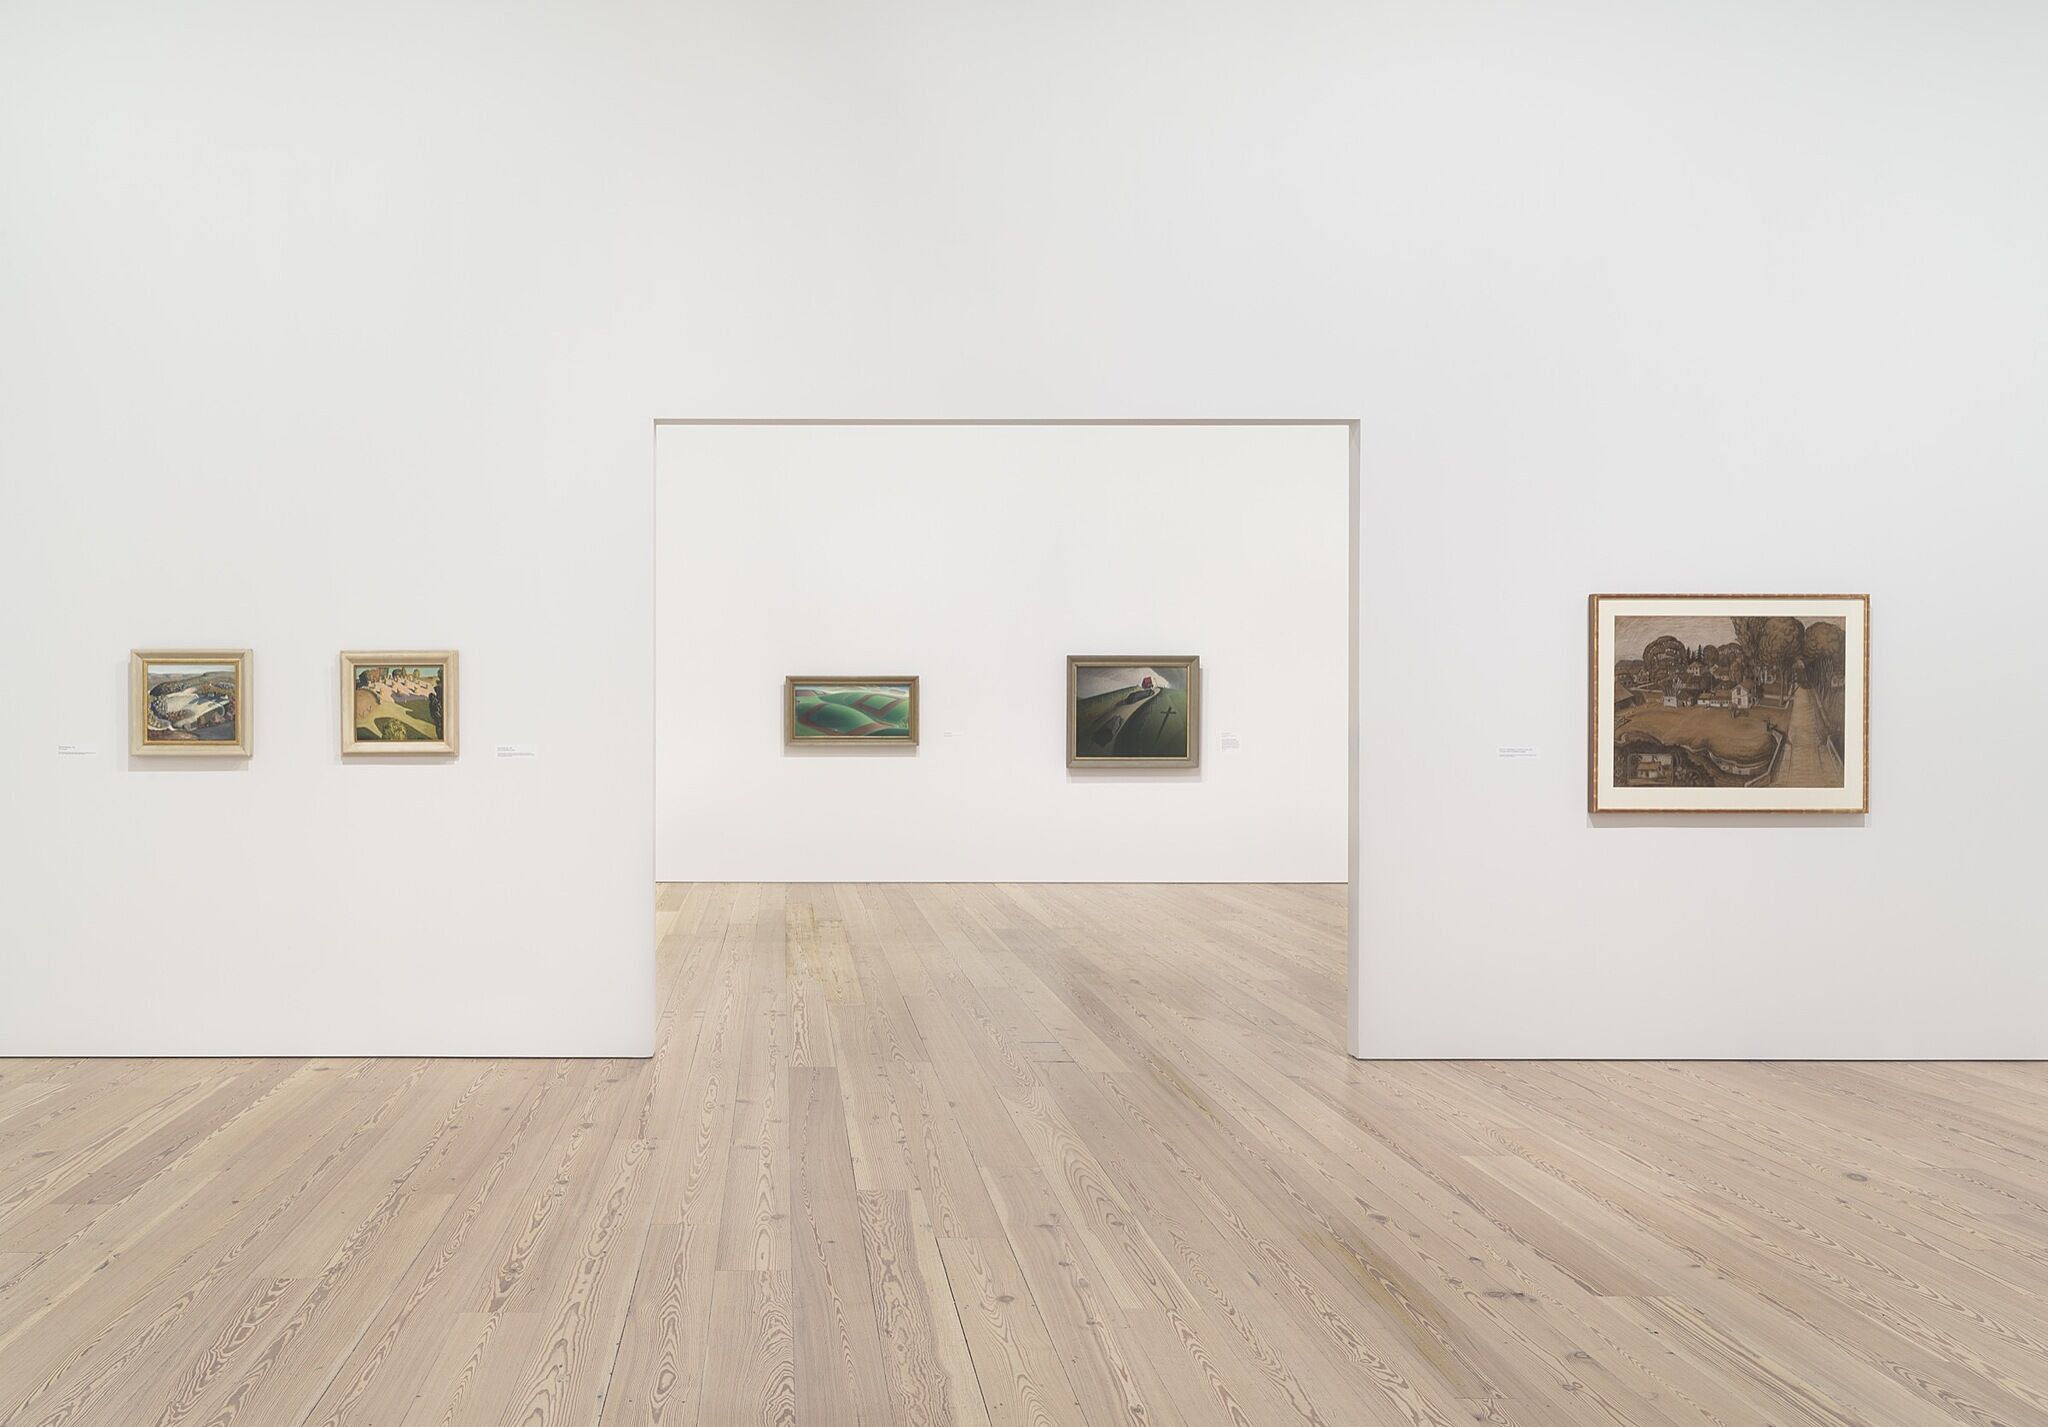 A photo of the Whitney galleries with various artworks.